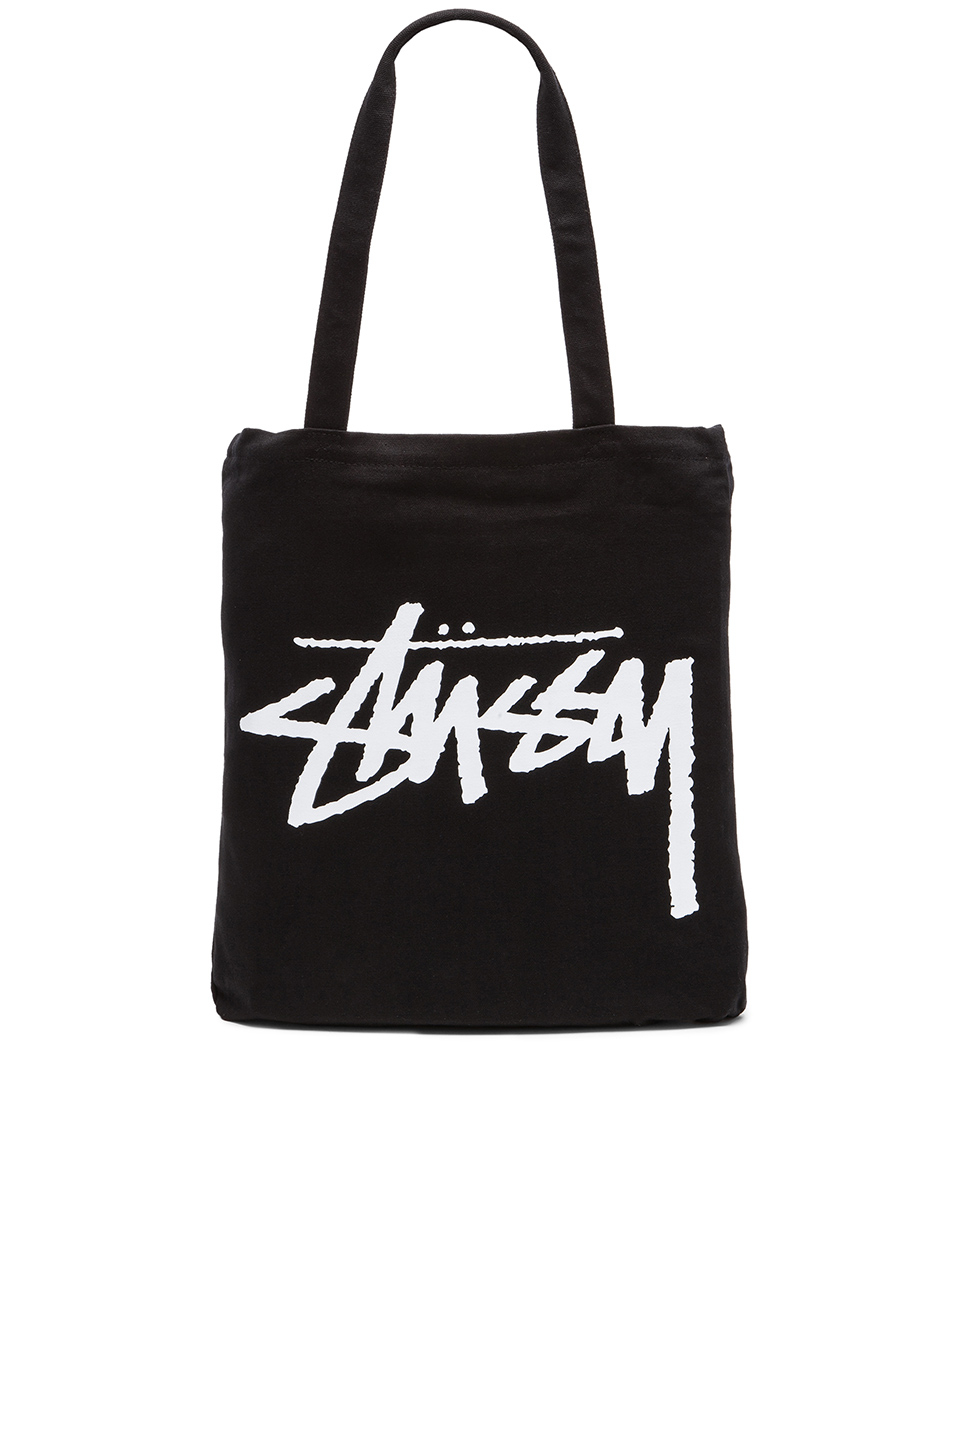 Lyst - Stussy Stock Canvas Tote Bag in Black for Men